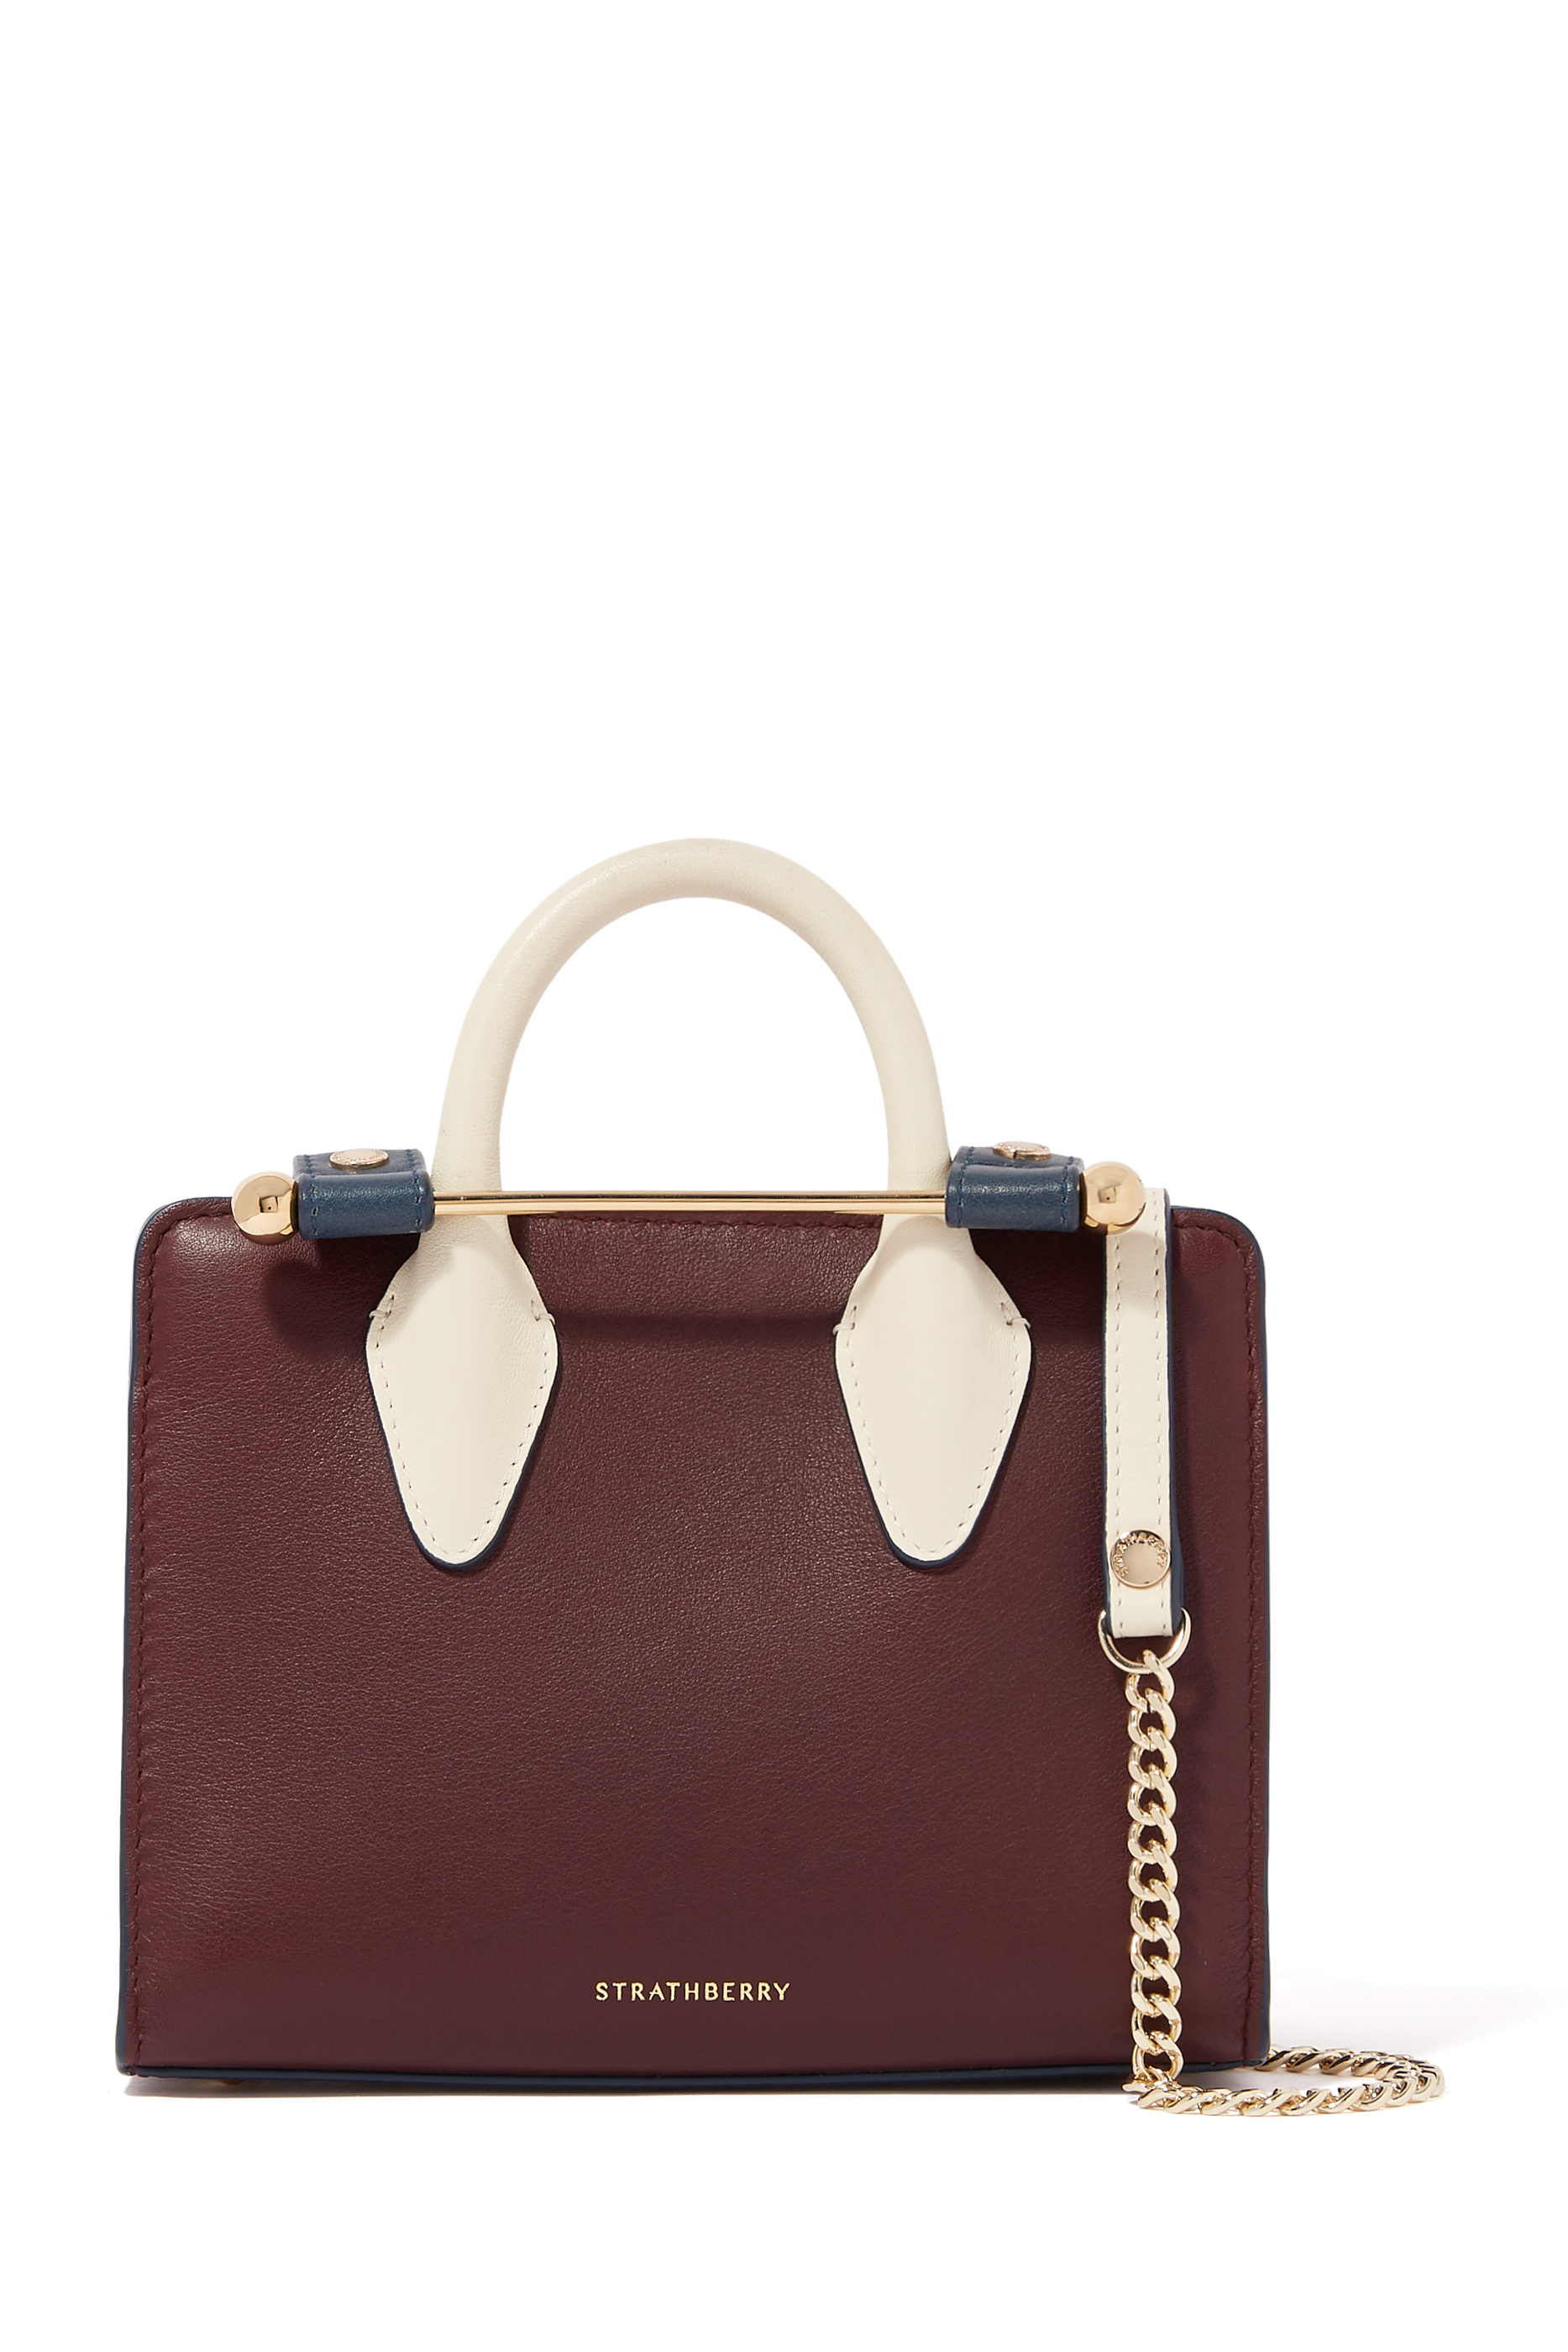 Buy Burgundy Strathberry Tricolor Nano Tote Bag - Womens for AED 2100.00 Tote Bags ...